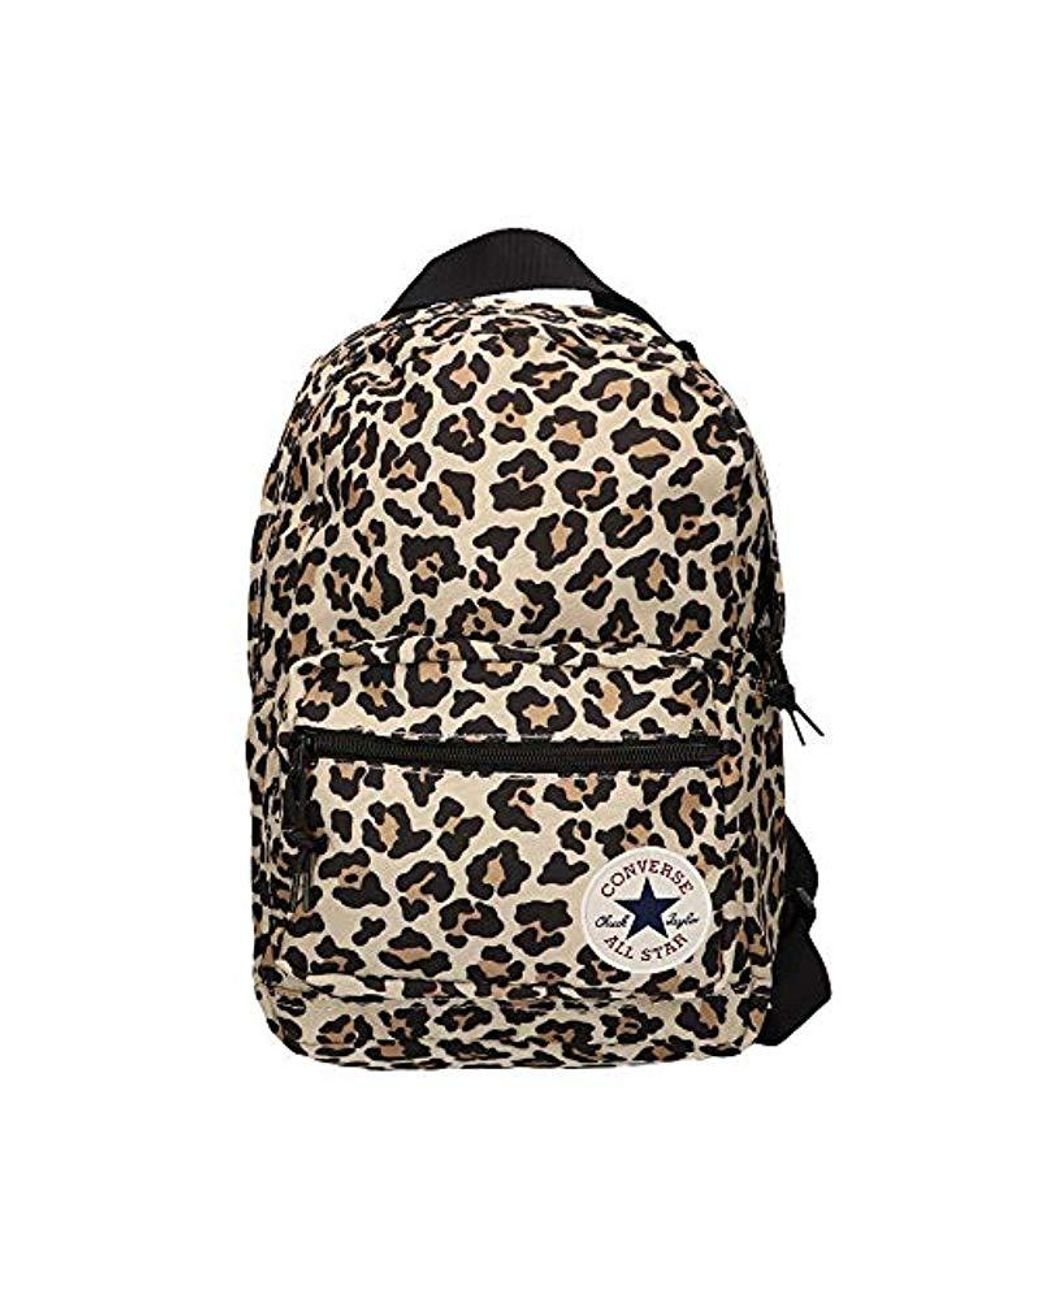 Converse Go Lo Leopard Backpack in Black | Lyst